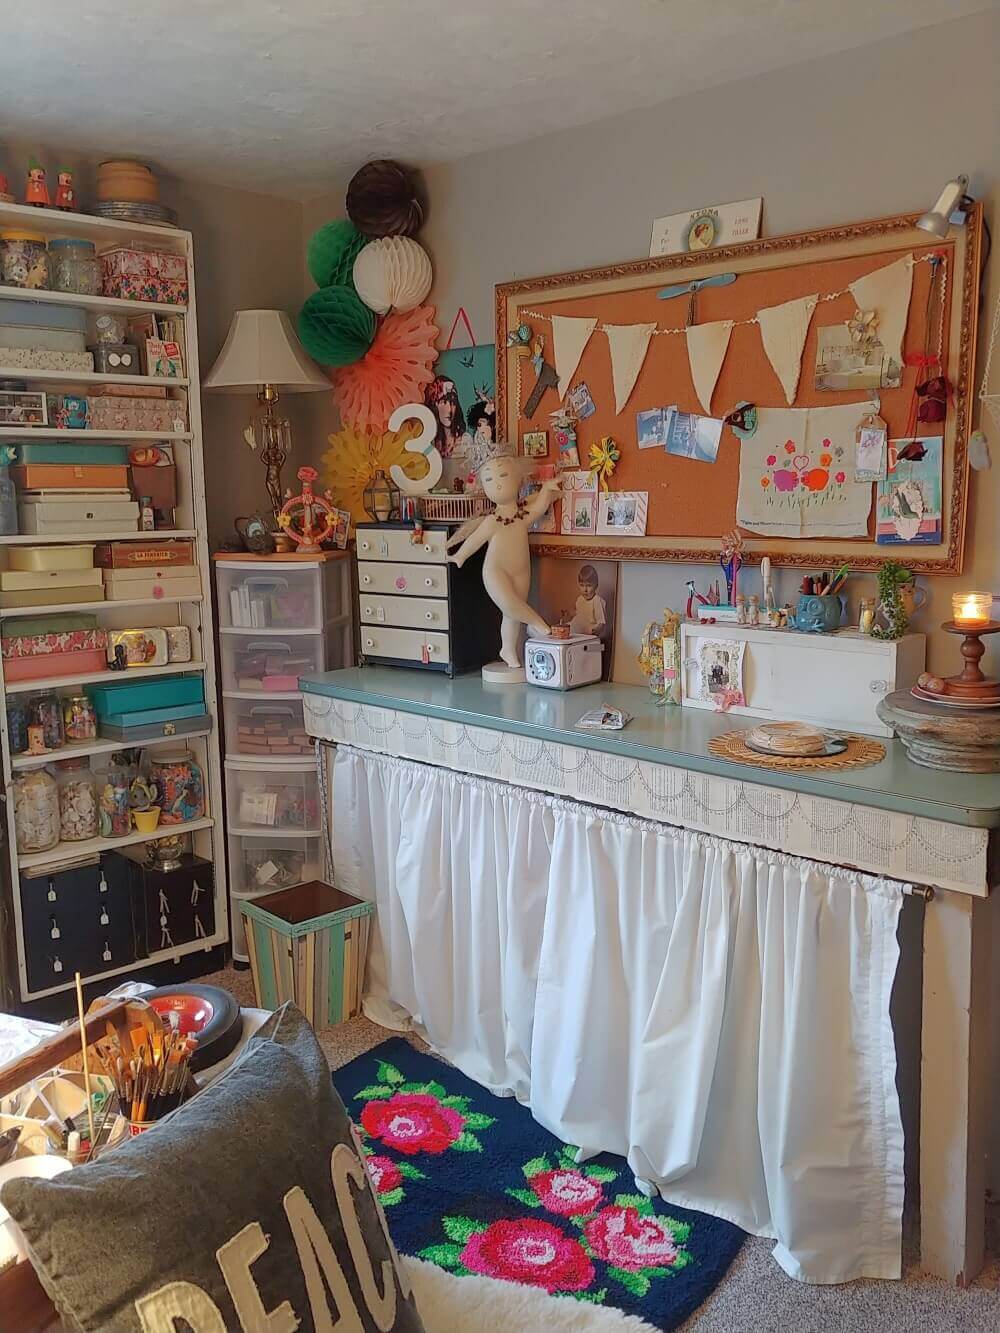 How to Make Space for a Craft Studio When You Don't Have Any Space